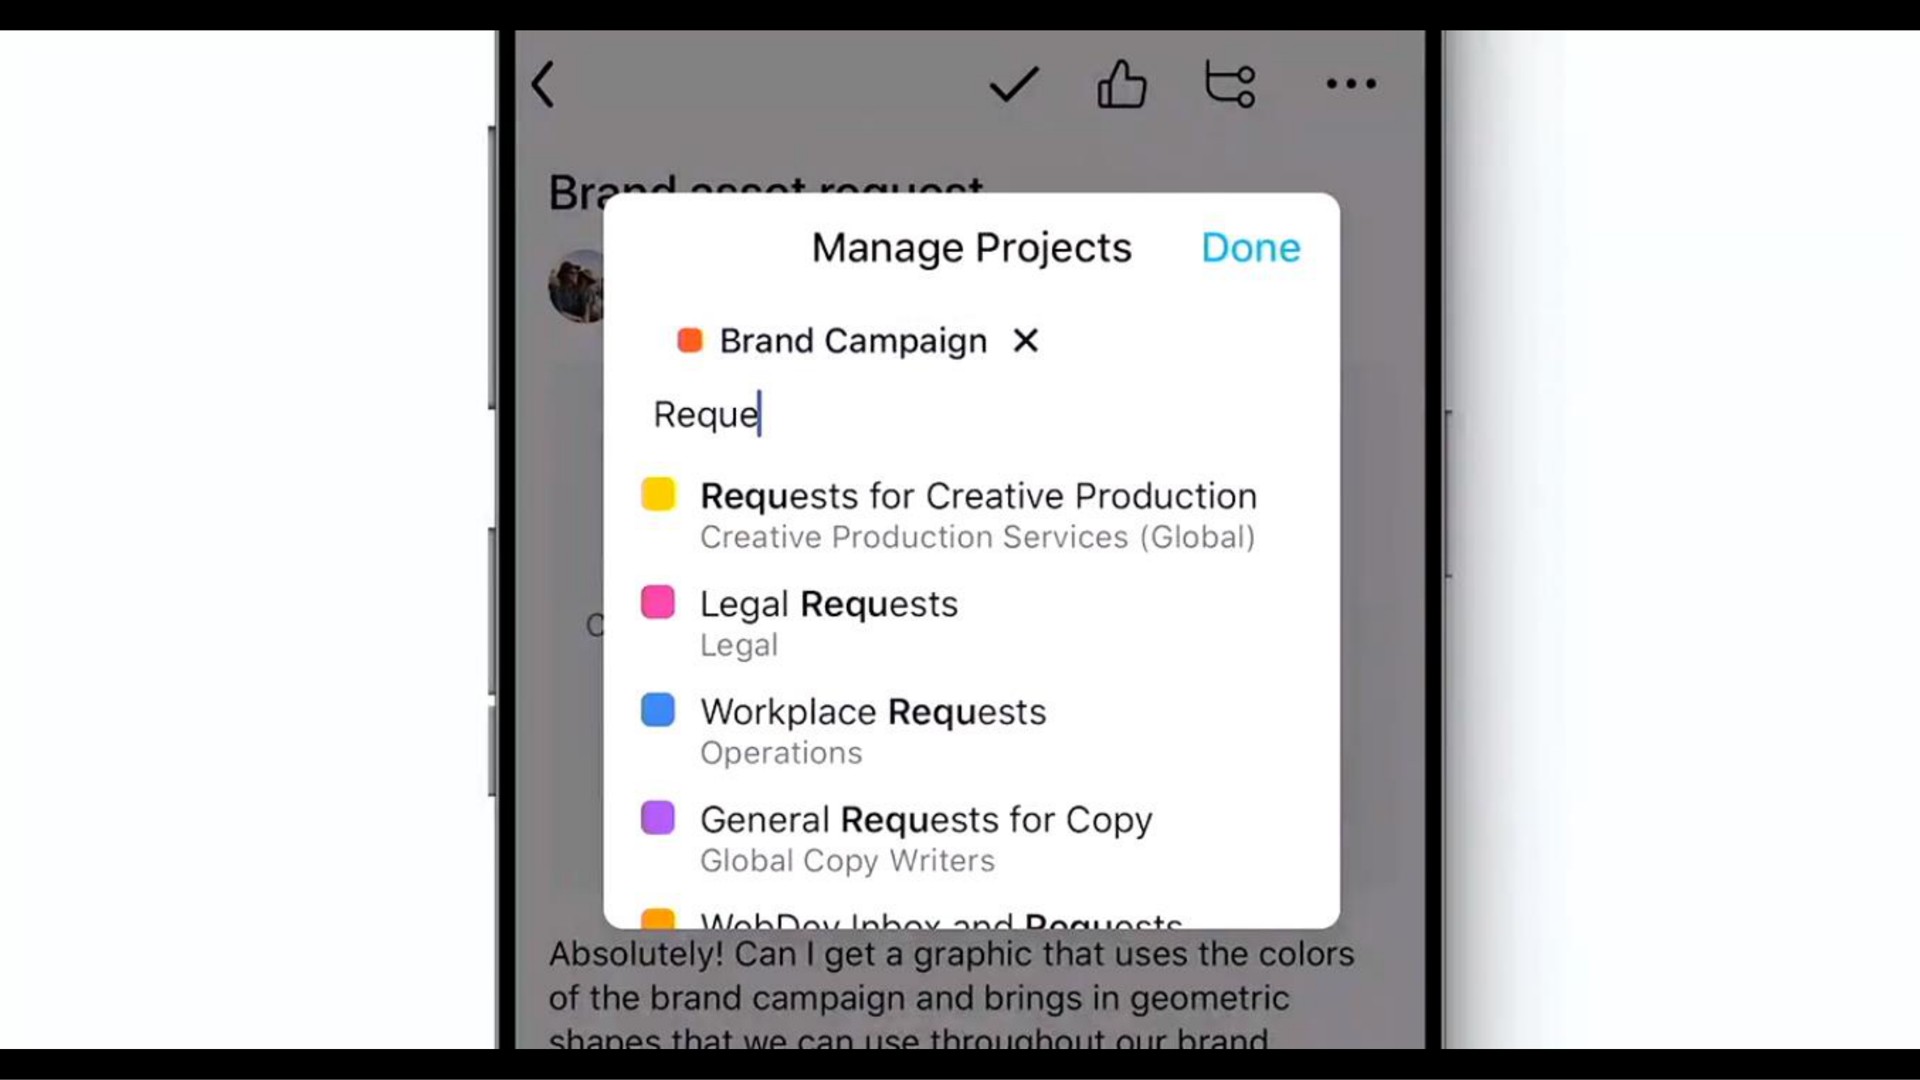 manage projects done brand campaign requests for creative production legal requests legal workplace requests global copy writers general requests for copy | Asana